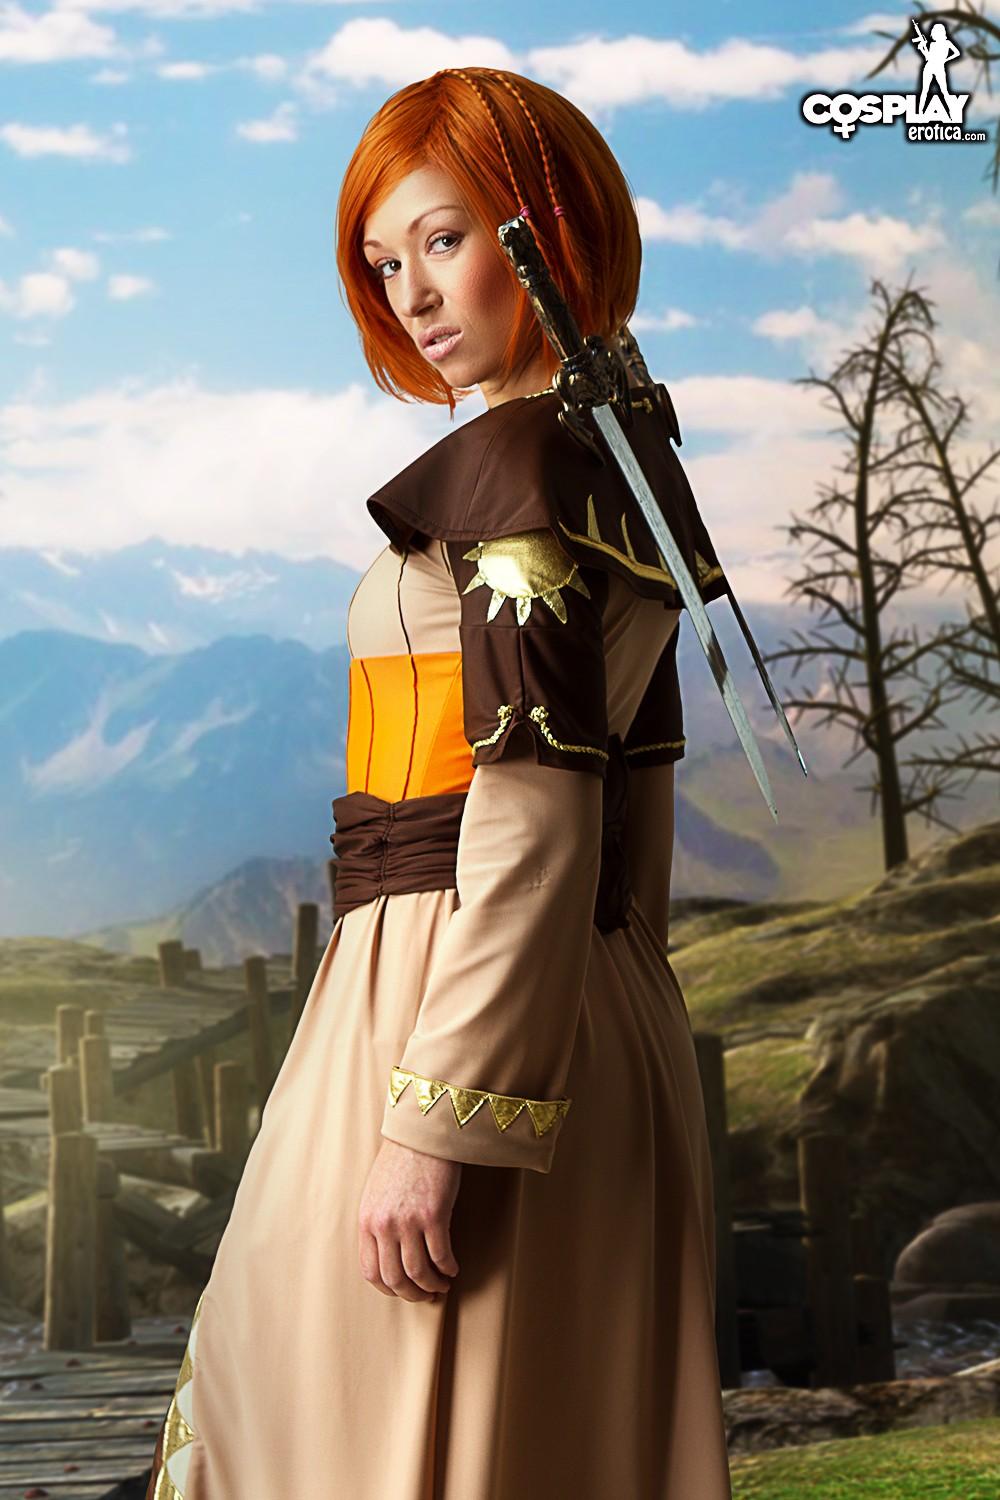 Redhead cosplayer Brownie dresses up as a fantasy character #53563776